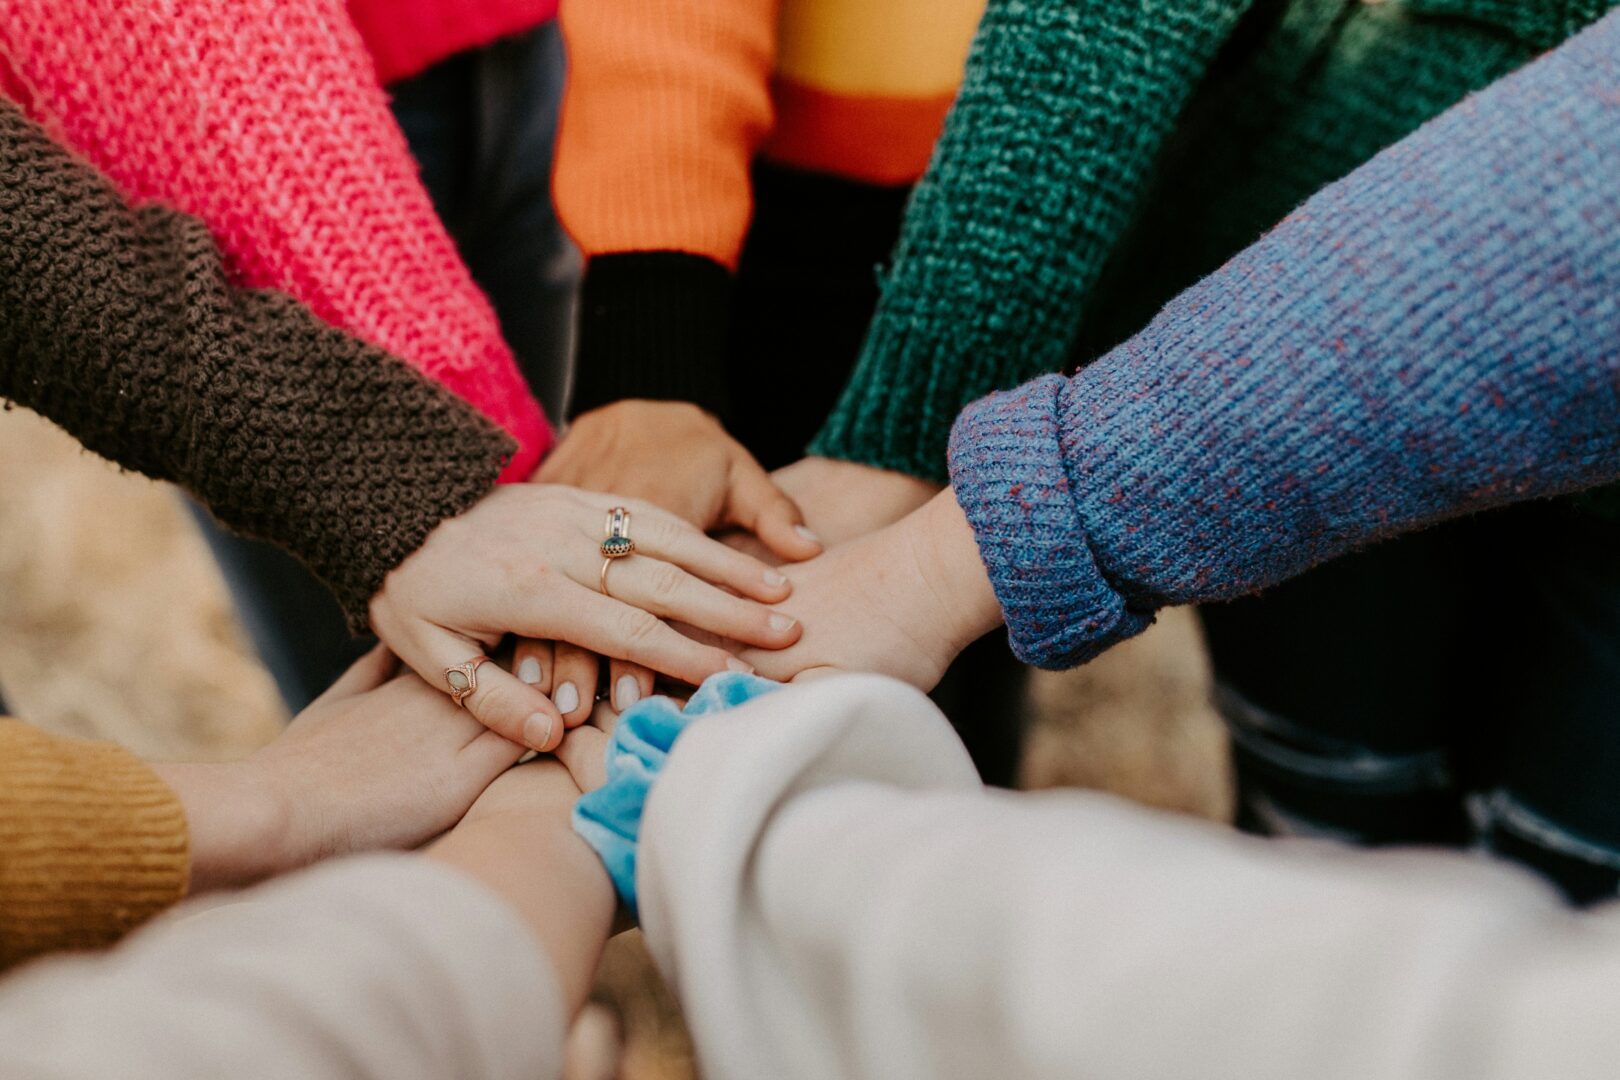 holding hands, substance abuse support, a group of people holding hands